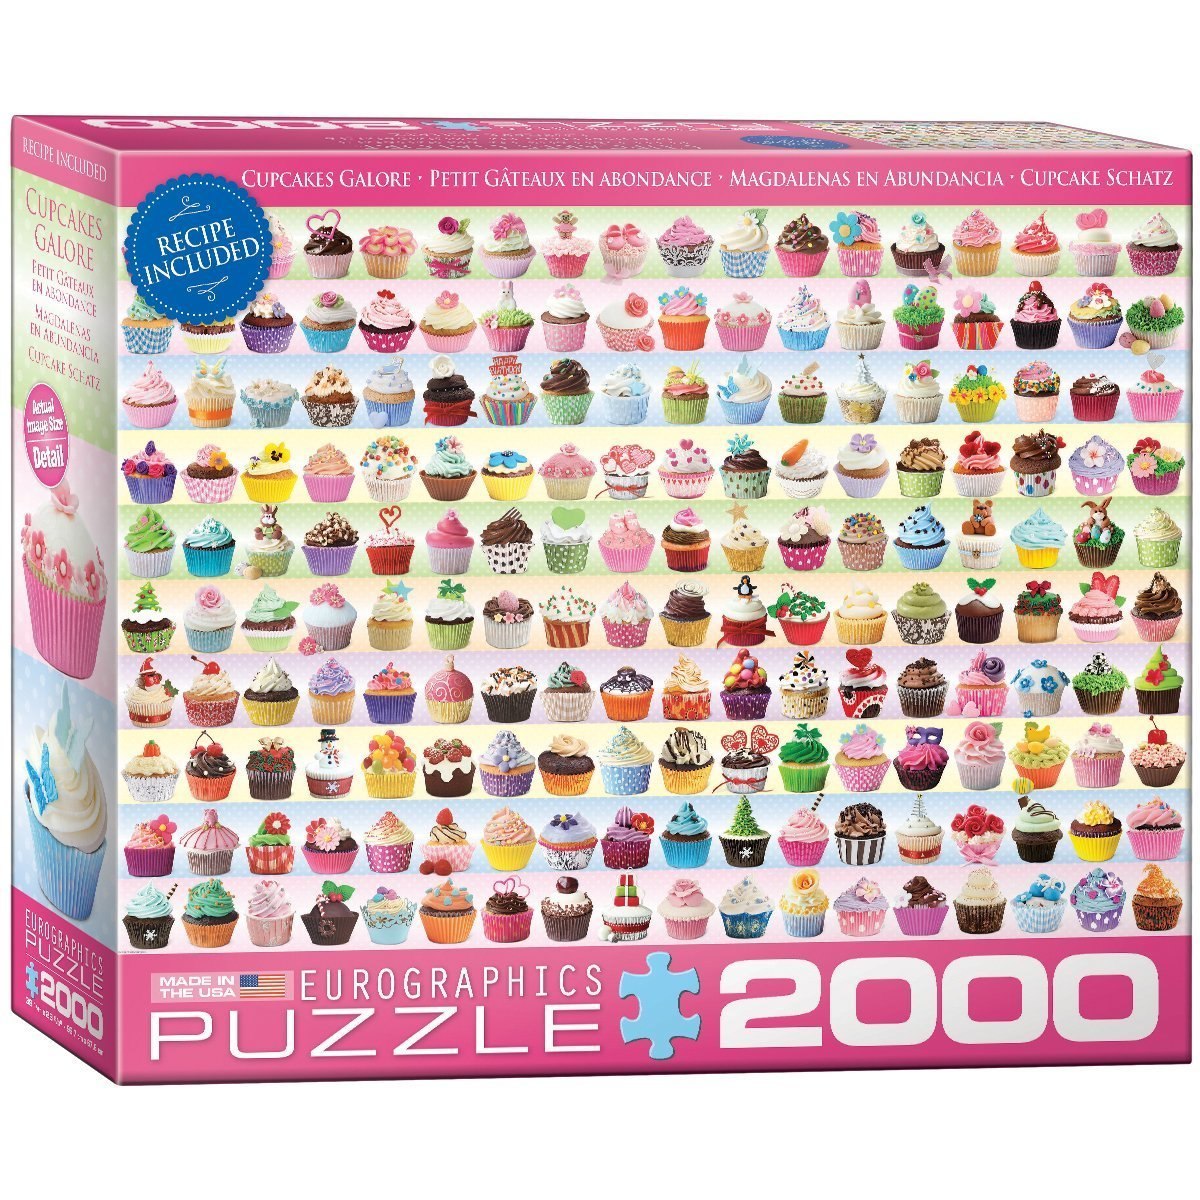 Cupcakes Galore - 2000pc Jigsaw Puzzle by Eurographics - image 2